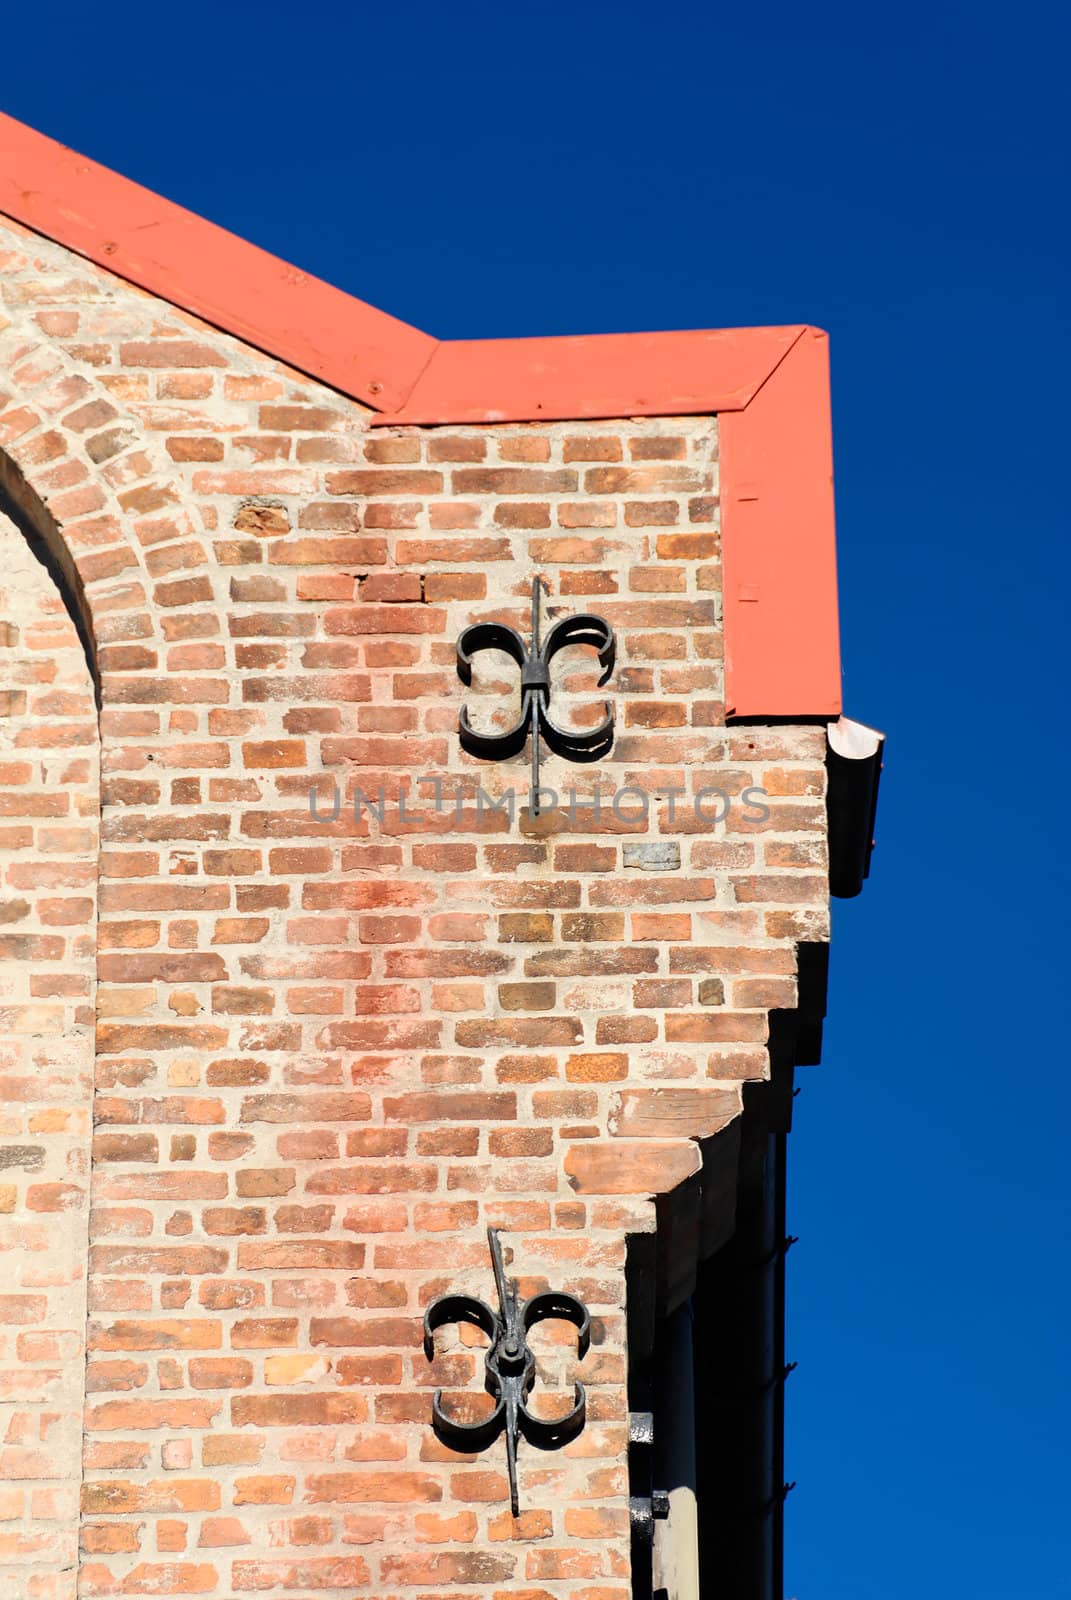 A corner of a brick house with two cast iron fixtures on polarised deep blue sky.
